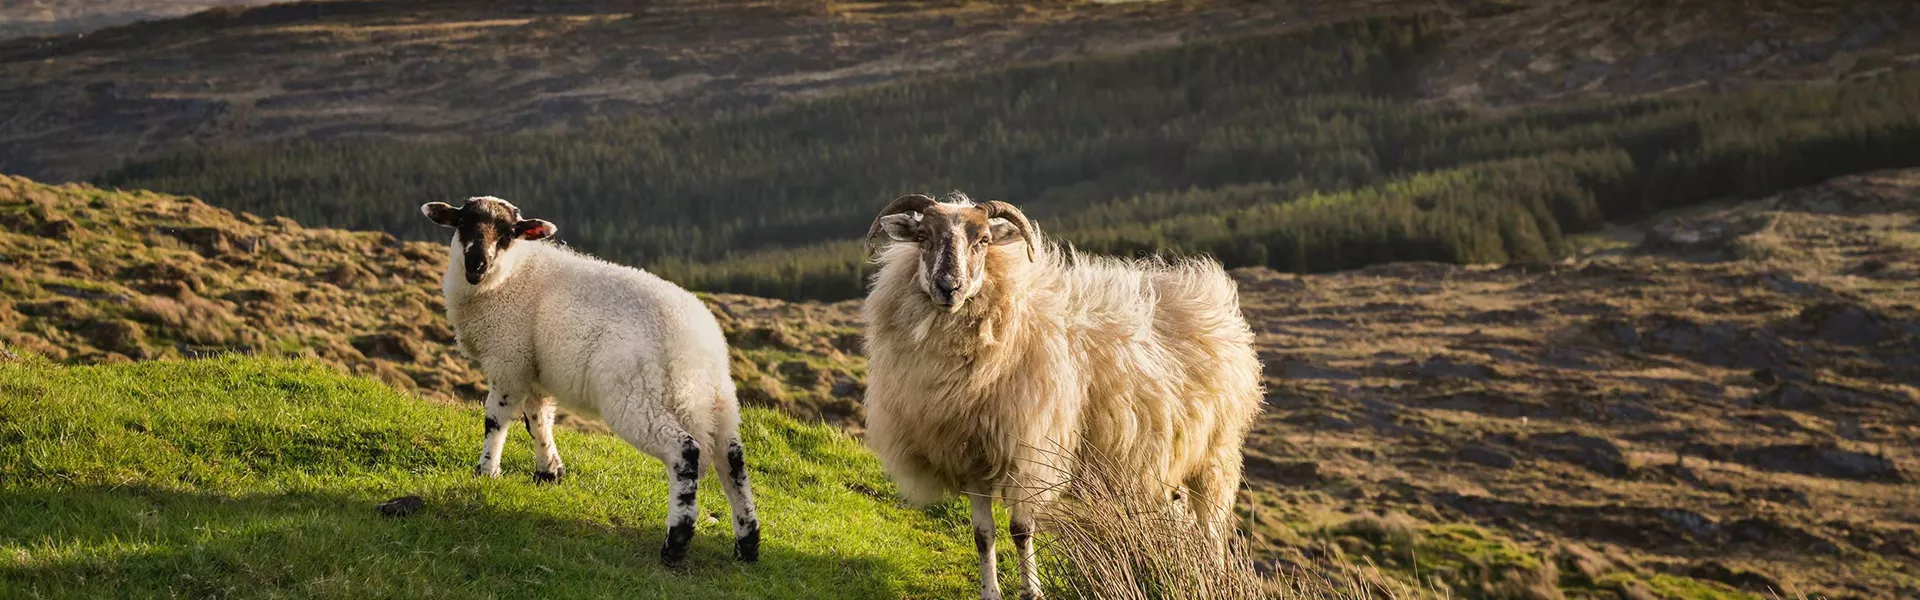 Sheep on a mountain landscape in Ireland